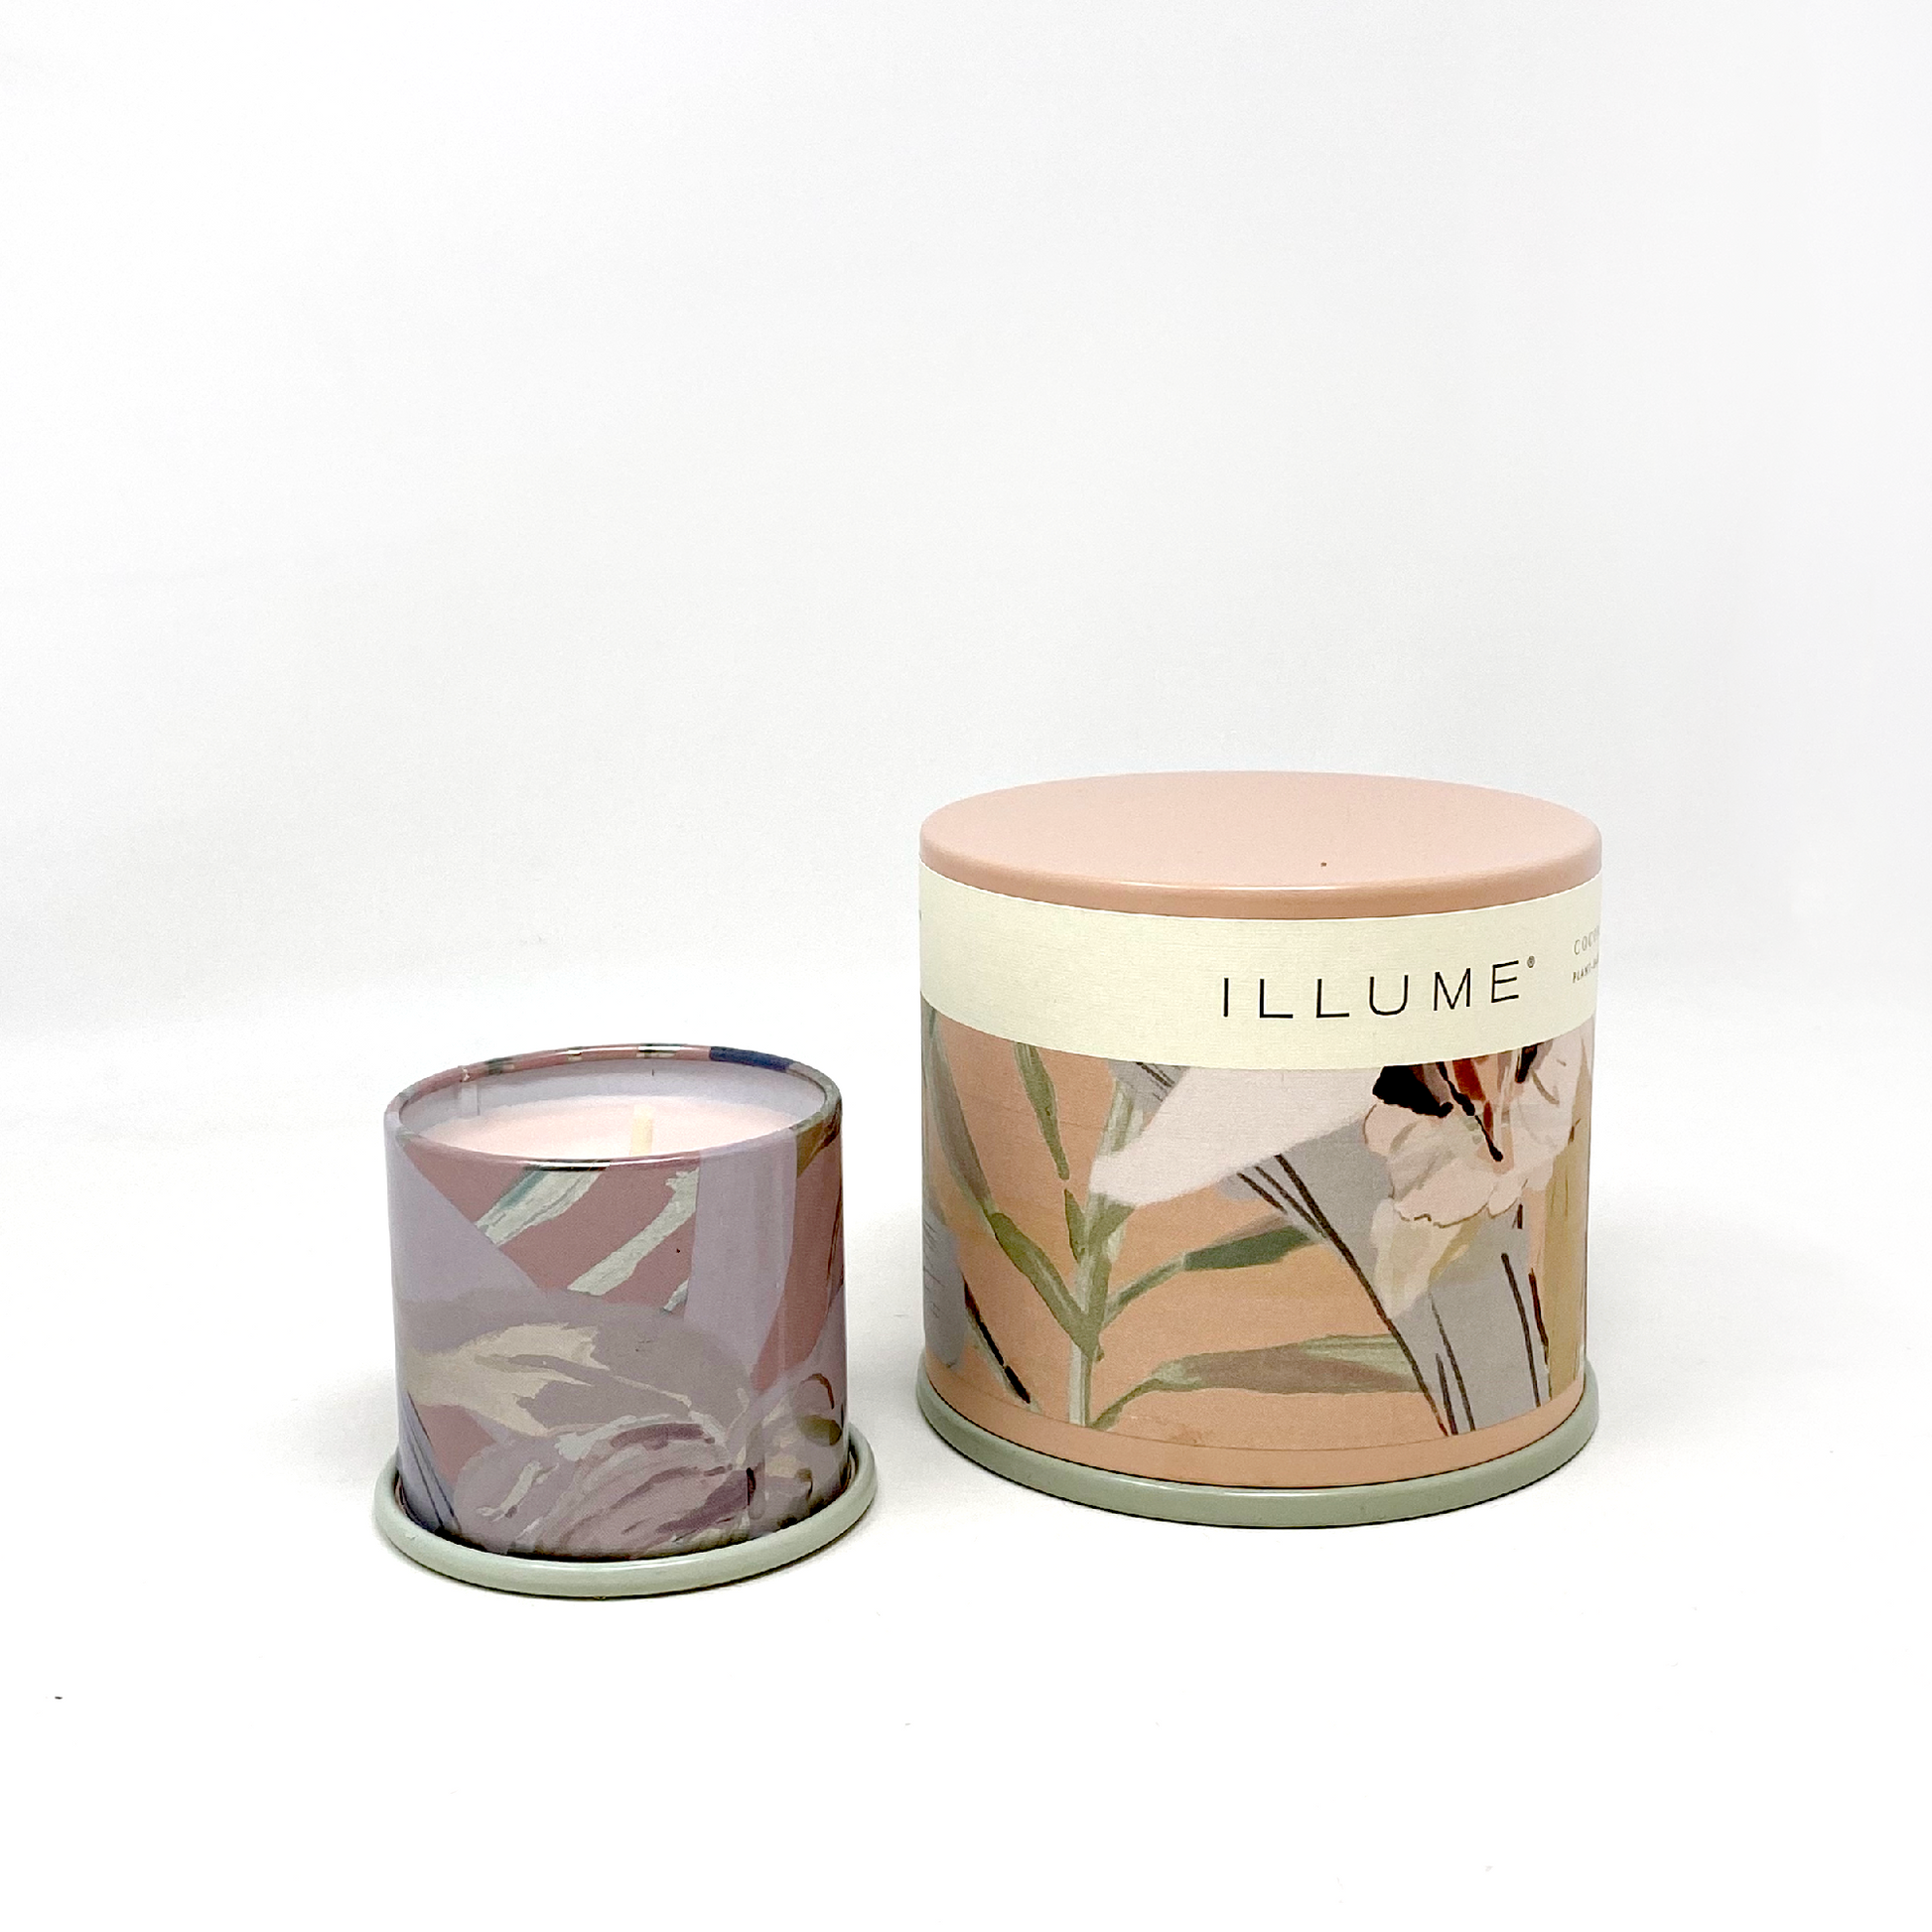 Illume Candles are refillable and smell and look lovely! These candles burn for 32+ hours and the illustrated packaging is so beautiful.